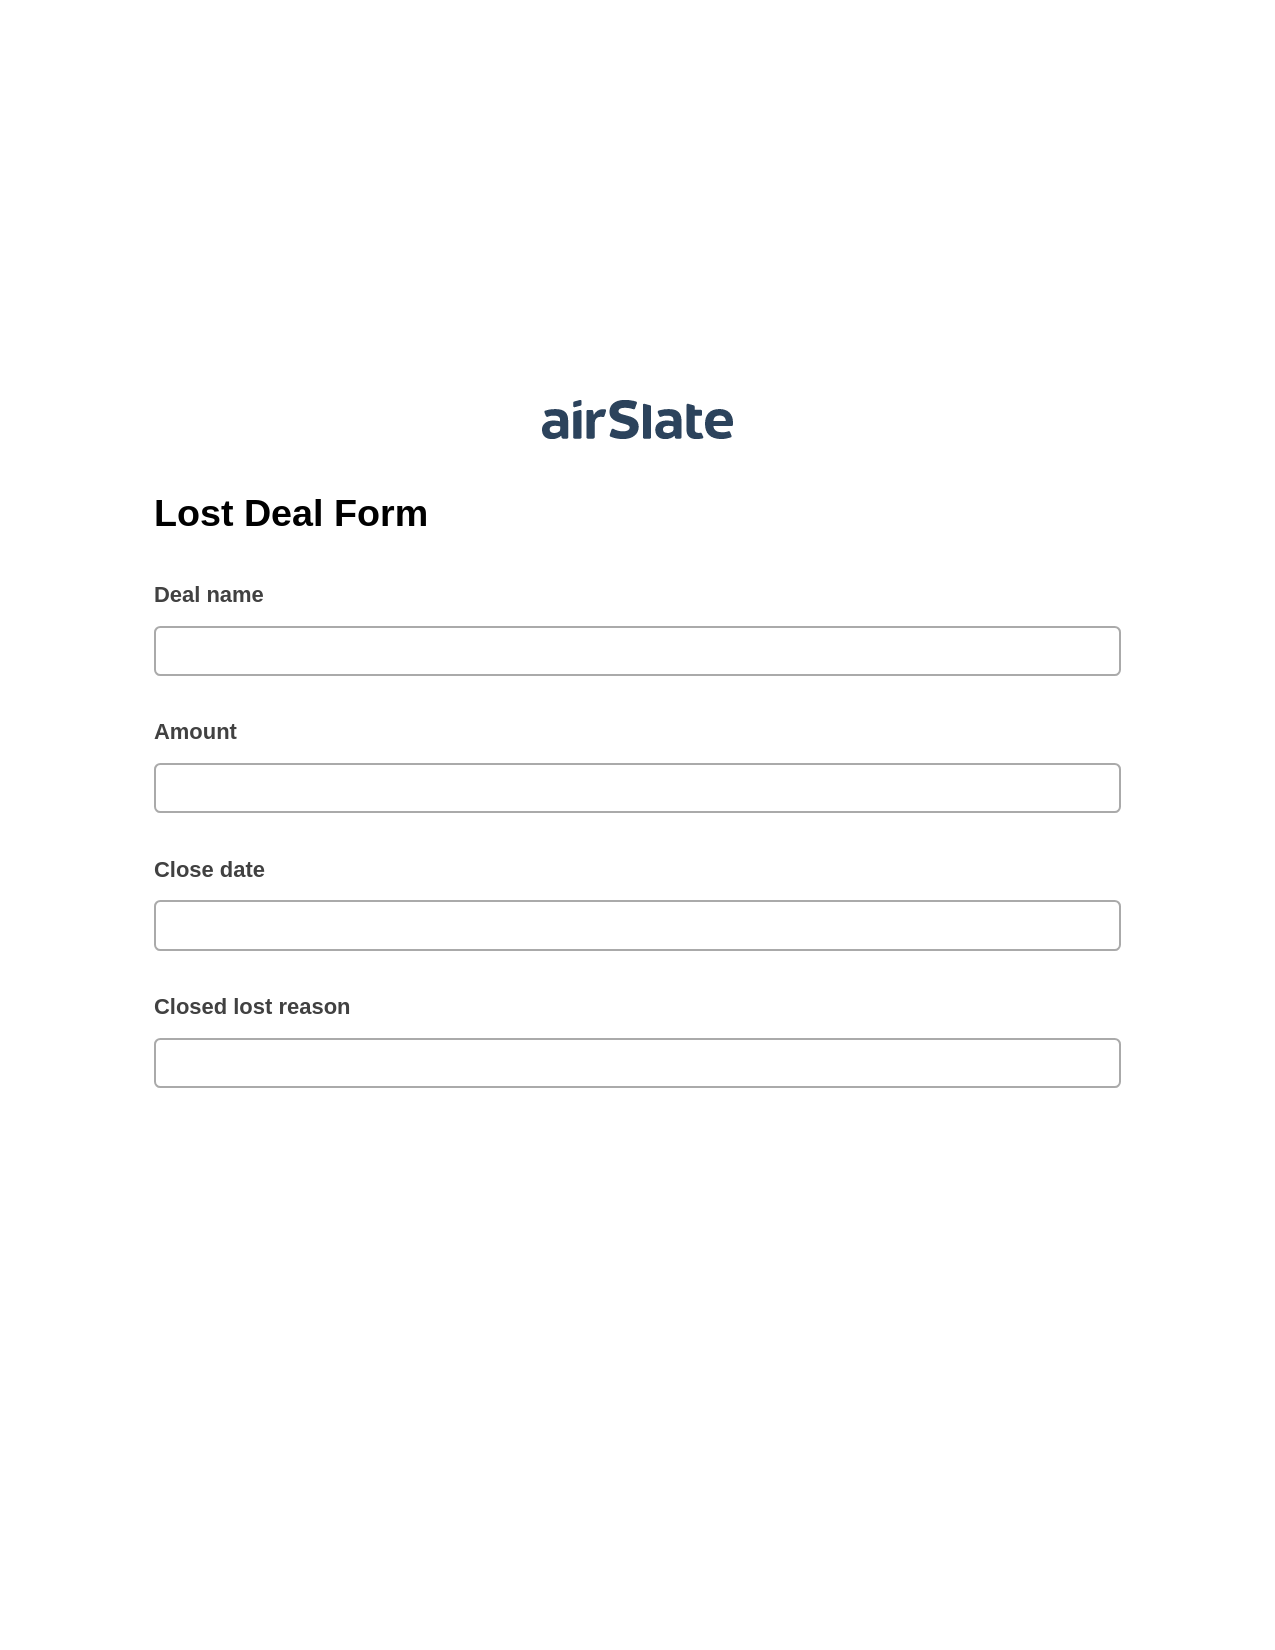 Lost Deal Form Pre-fill from Salesforce Records Bot, Send Mailchimp Campaign Bot, Archive to Box Bot